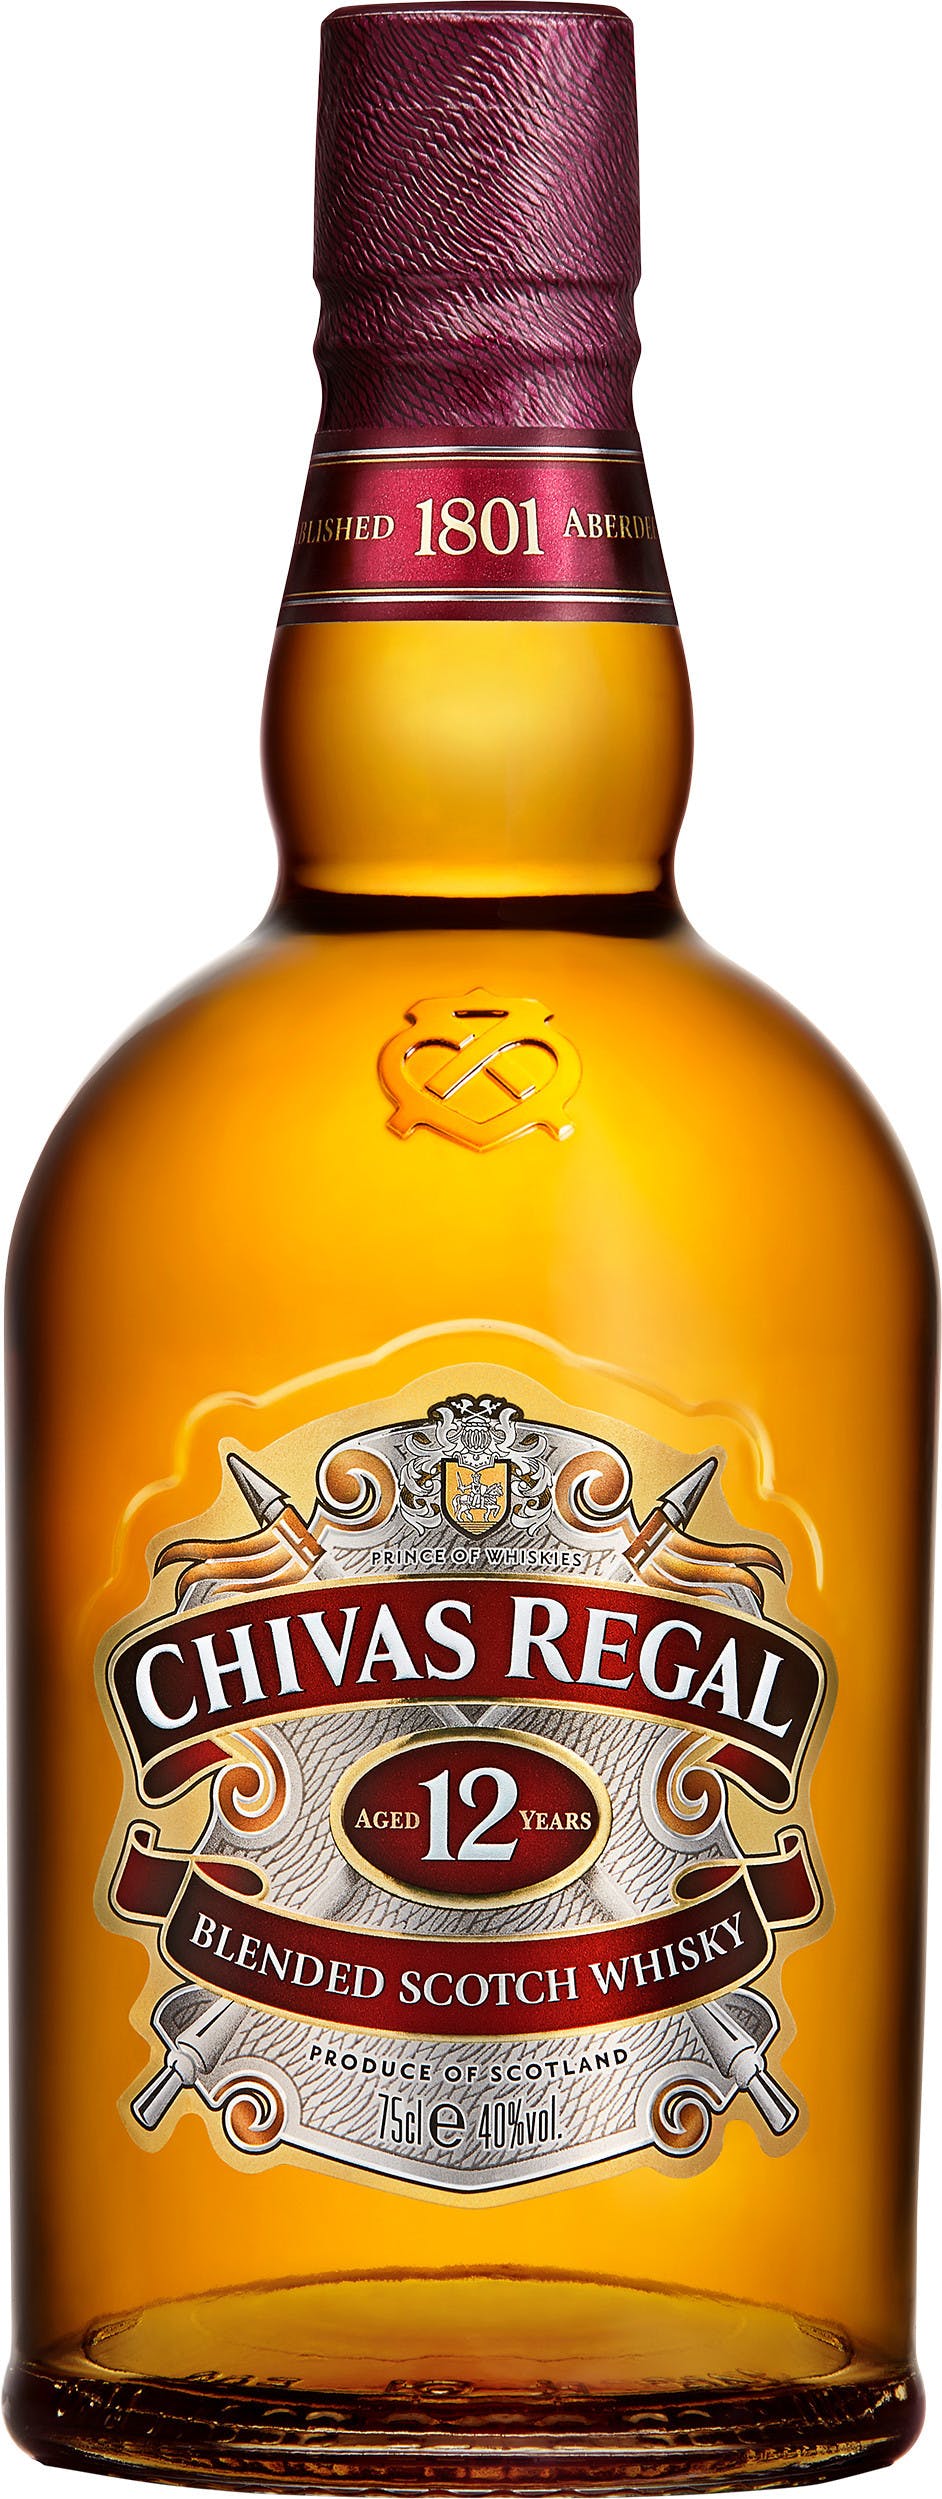 Chivas Regal Blended Scotch Whisky 12 year old 750ml - Garden State  Discount Liquors